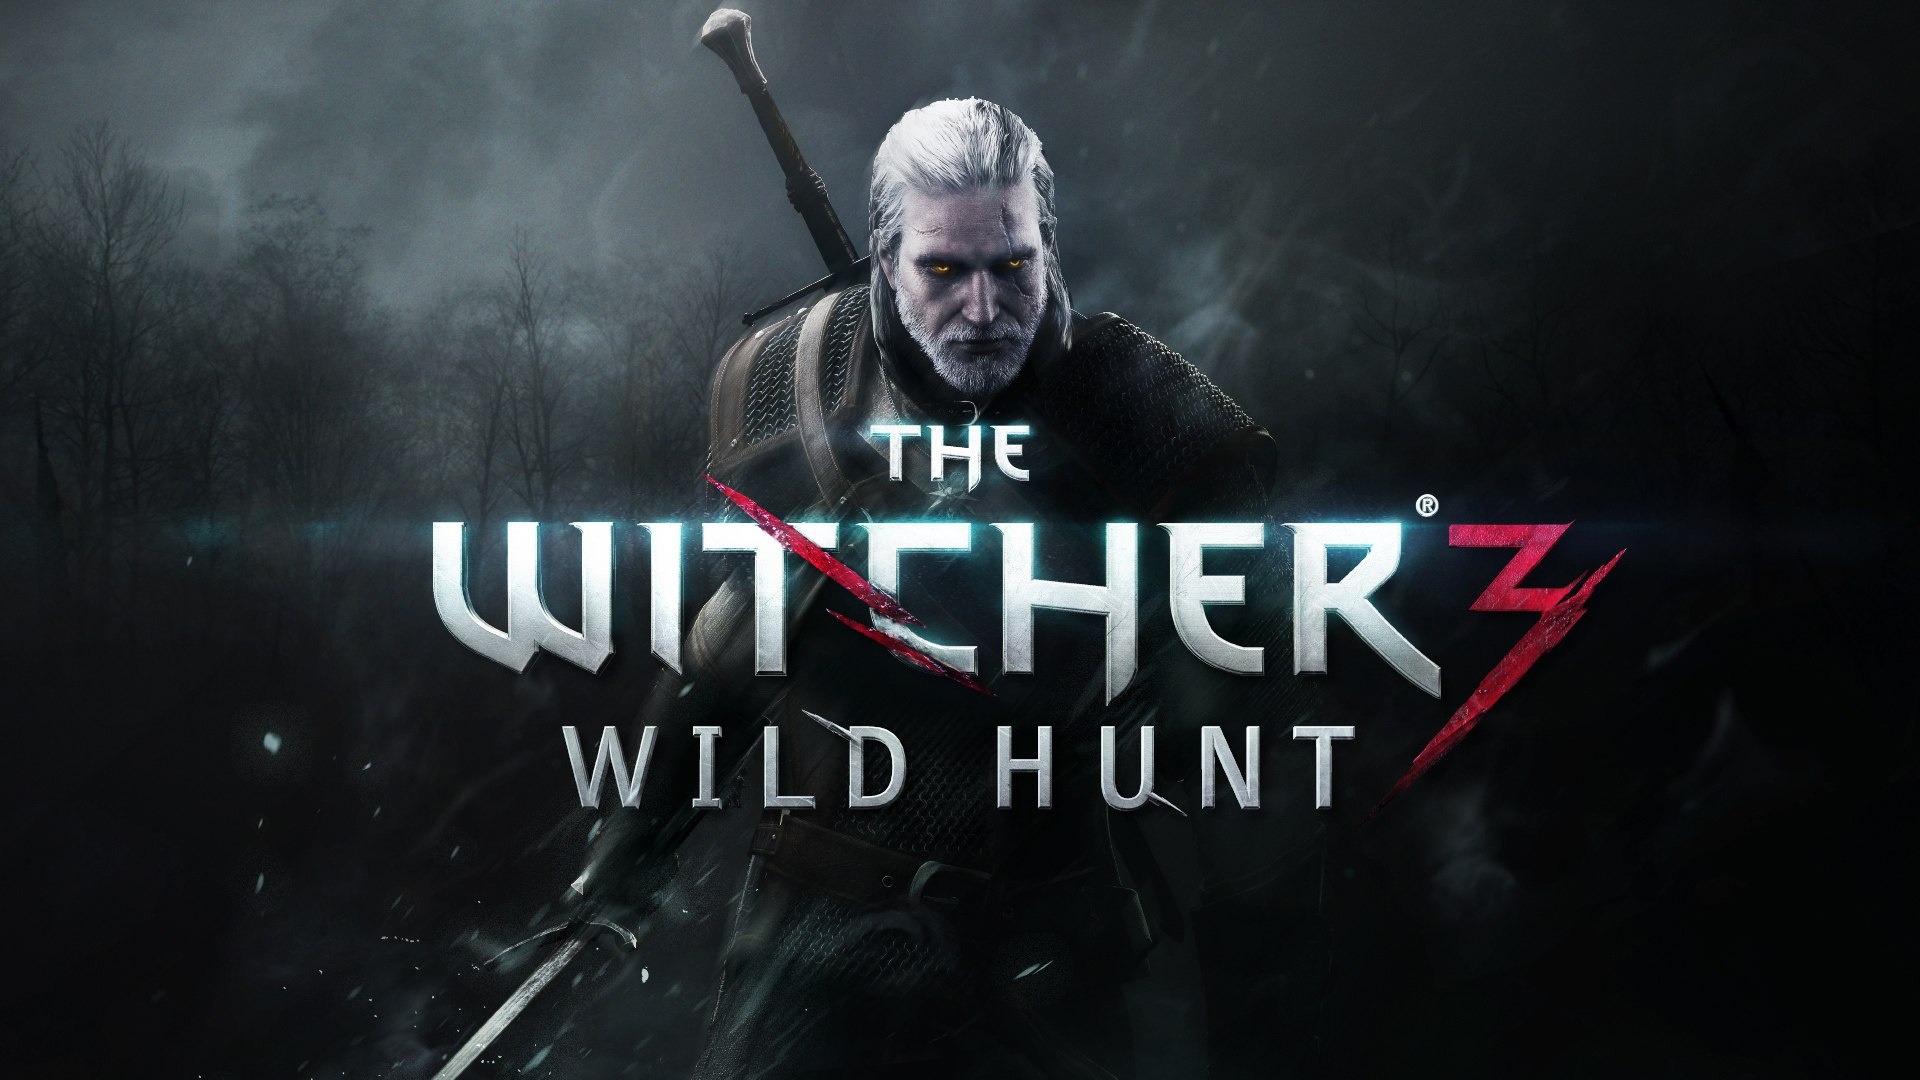 The Witcher 3 for 1920 x 1080 HDTV 1080p resolution